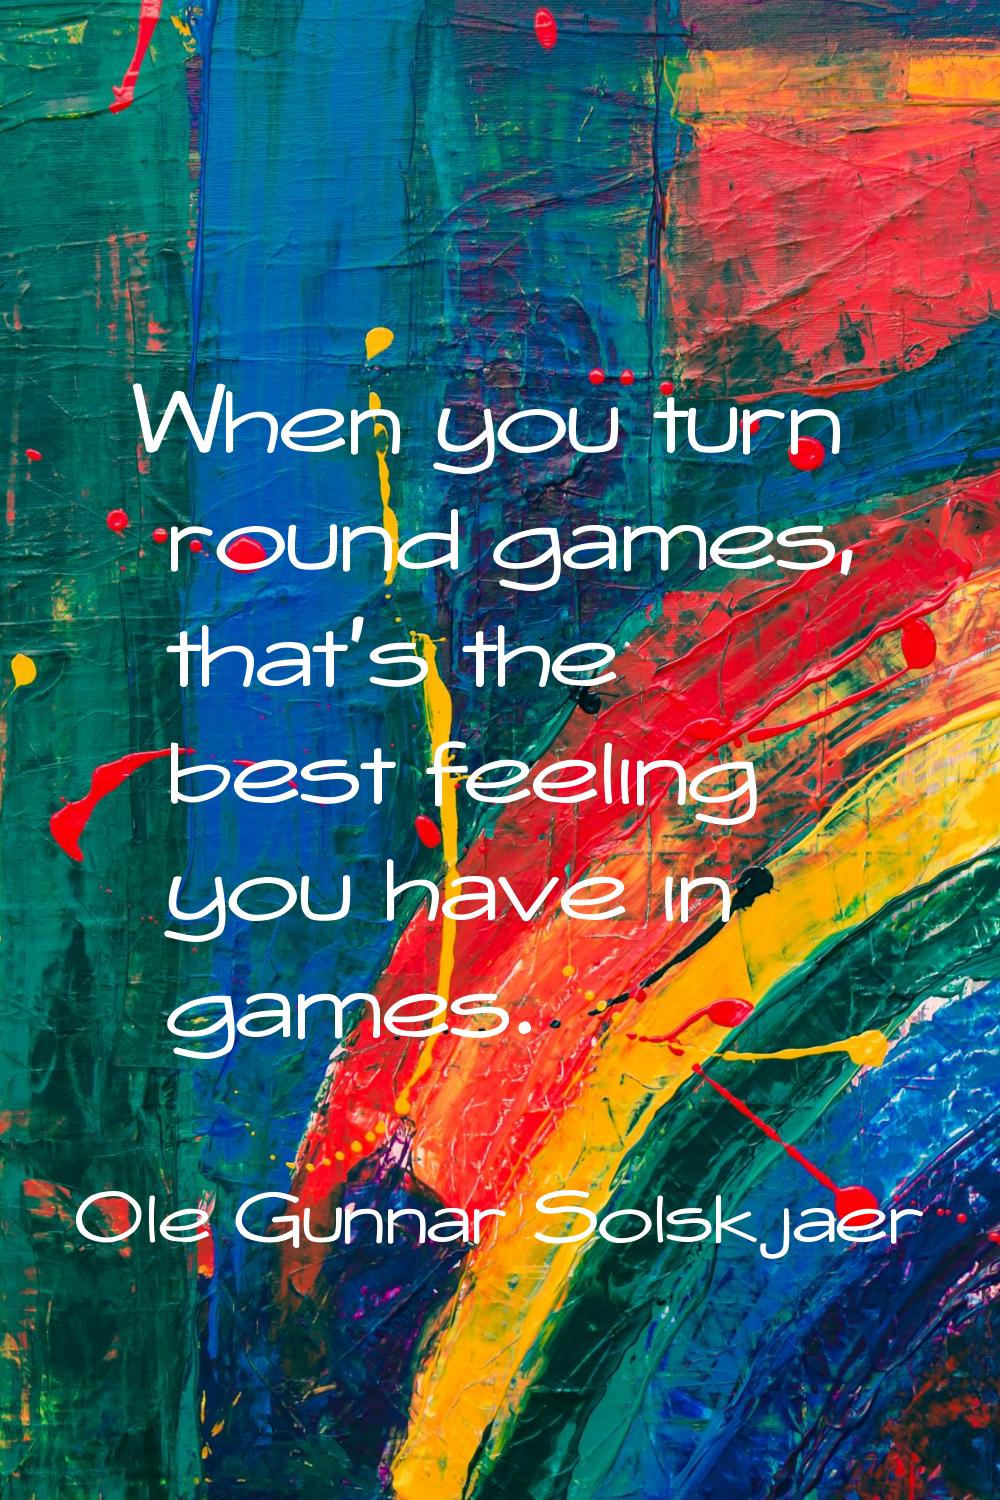 When you turn round games, that's the best feeling you have in games.